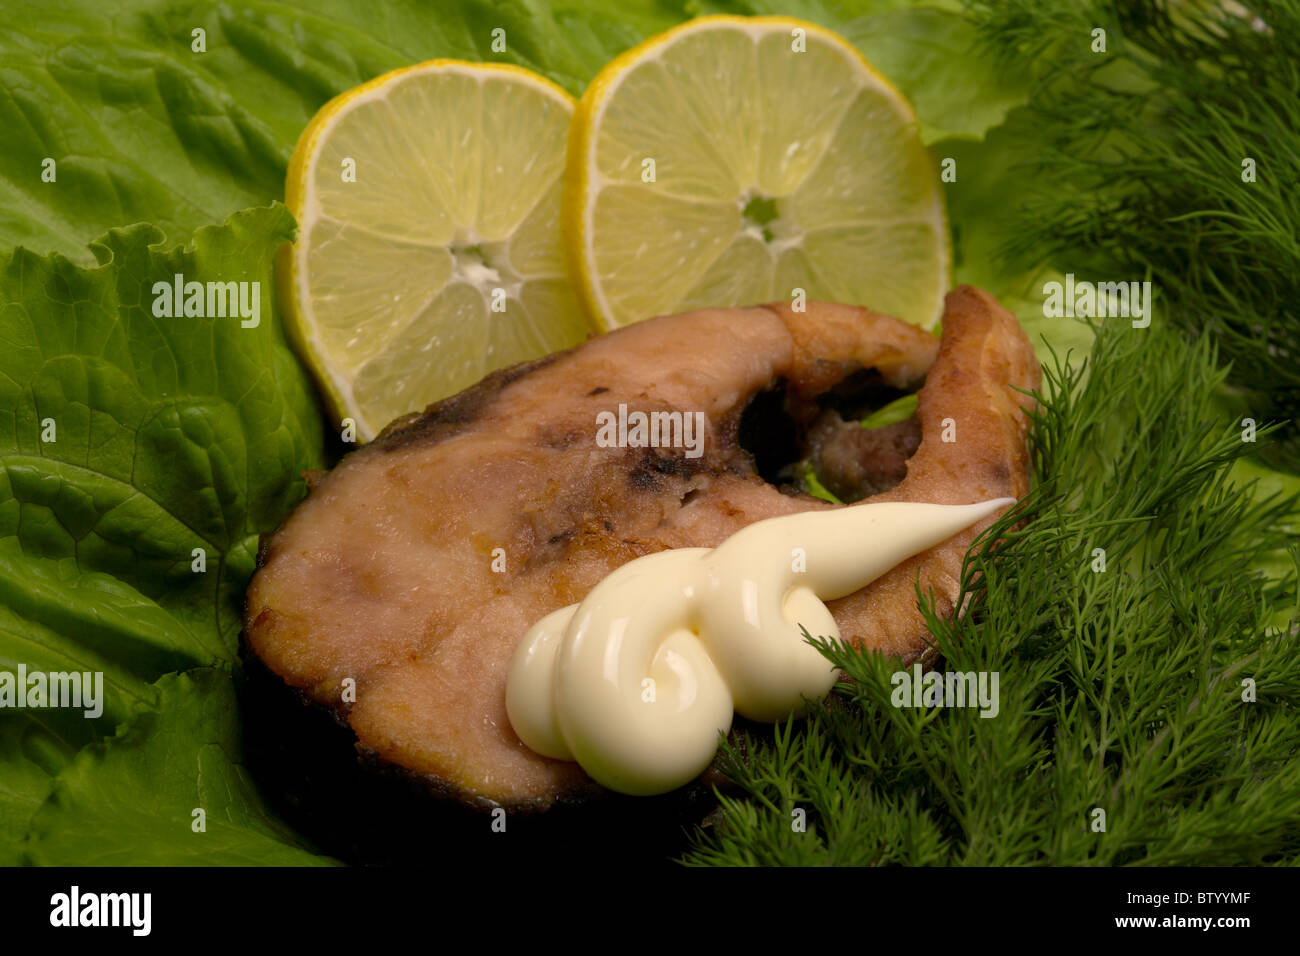 Portion of a fried fish. Served by fennel and leaves of salad. Stock Photo